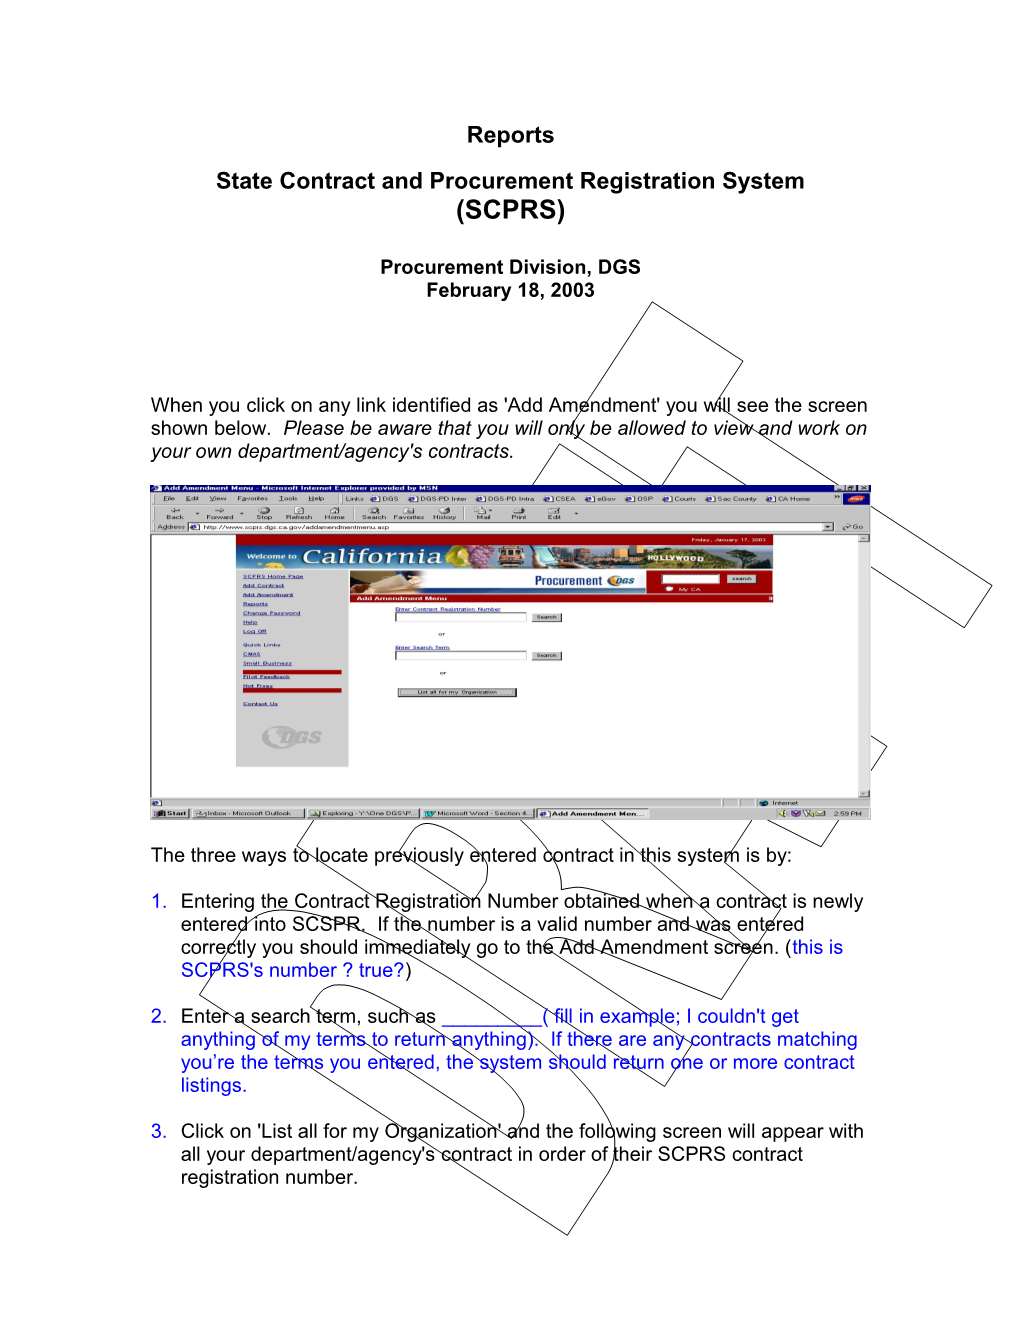 State Contract and Procurement Registration System